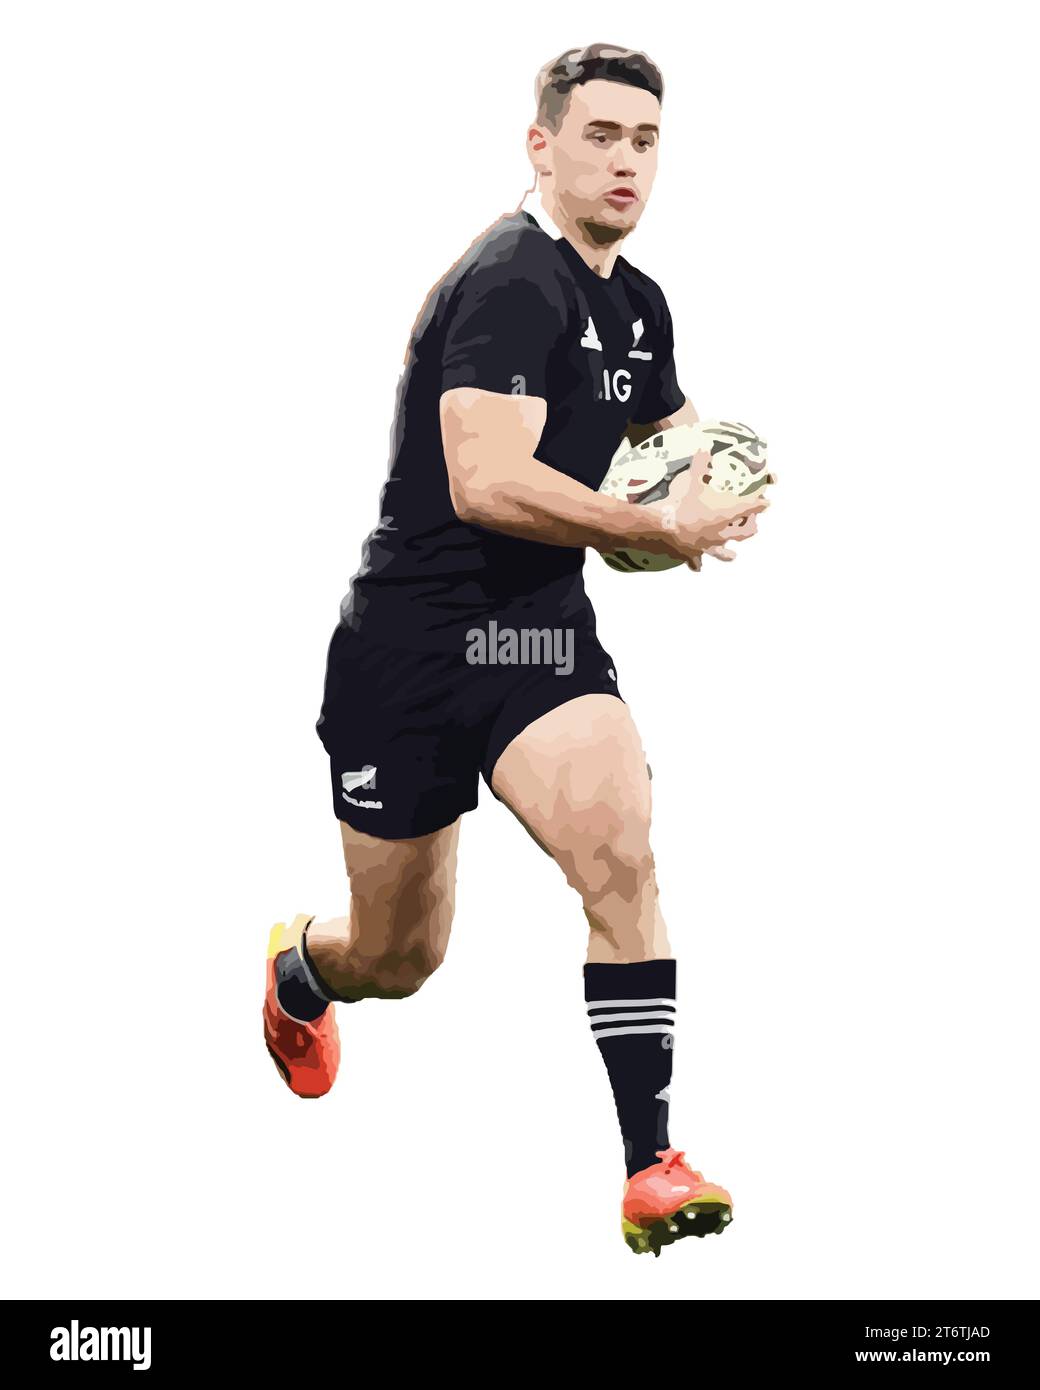 New zealand rugby union Stock Vector Images - Alamy